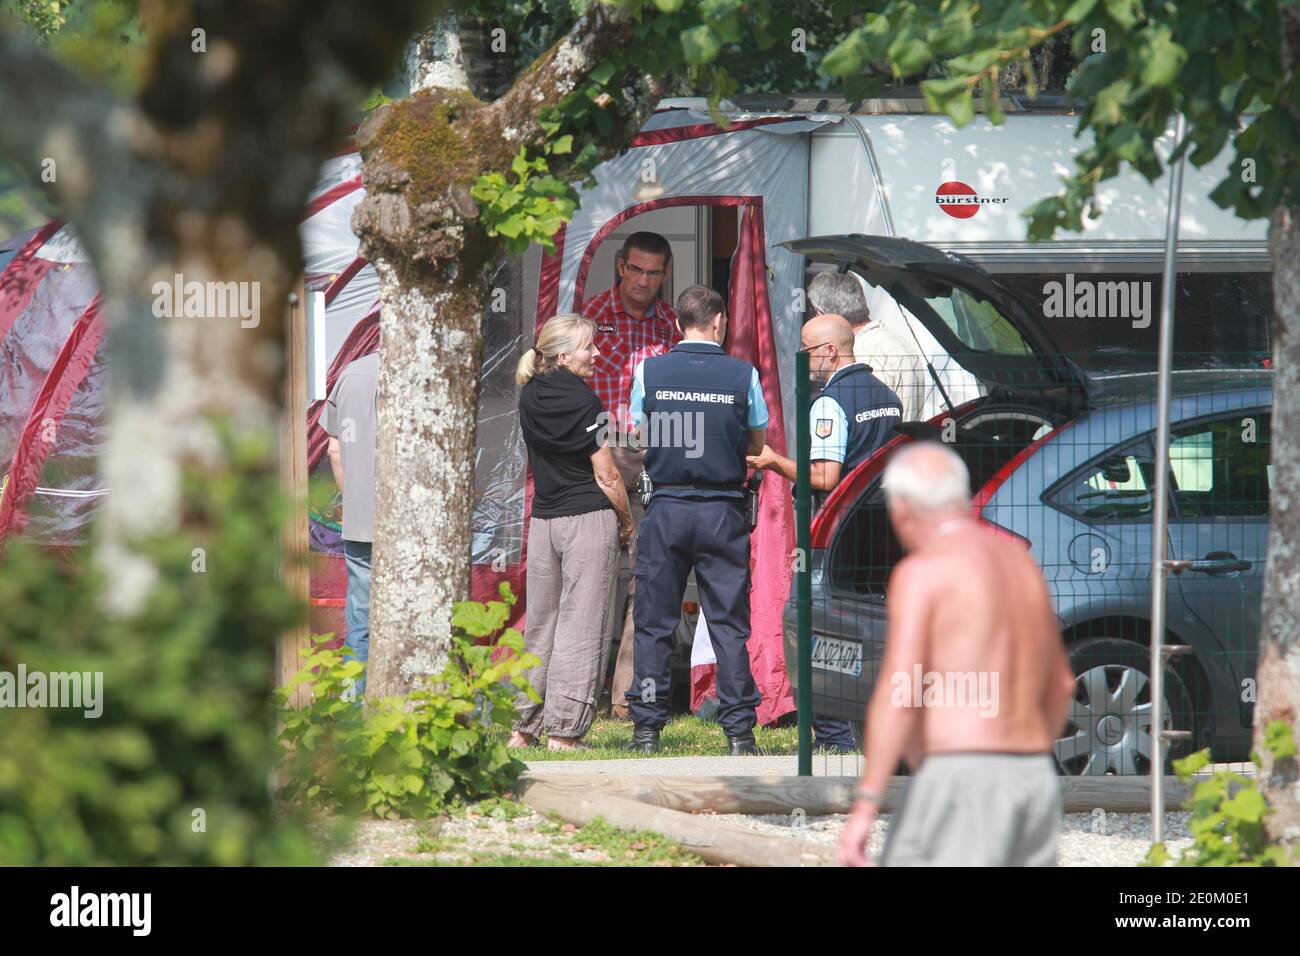 Police investigate the caravan of the shooting victims at Le Solitaire du Lac camp site in Saint-Jorioz, French Alps on September 6, 2012. One man, named as Saad al-Hilli from Surrey, and an elderly woman were found dead in a British-registered BMW. A French cyclist, found close to the scene, was also killed. A second woman was also killed. A girl, four, hid in the car for eight hours before being found by police. Photo by Vincent Dargent/ABACAPRESS.COM Stock Photo